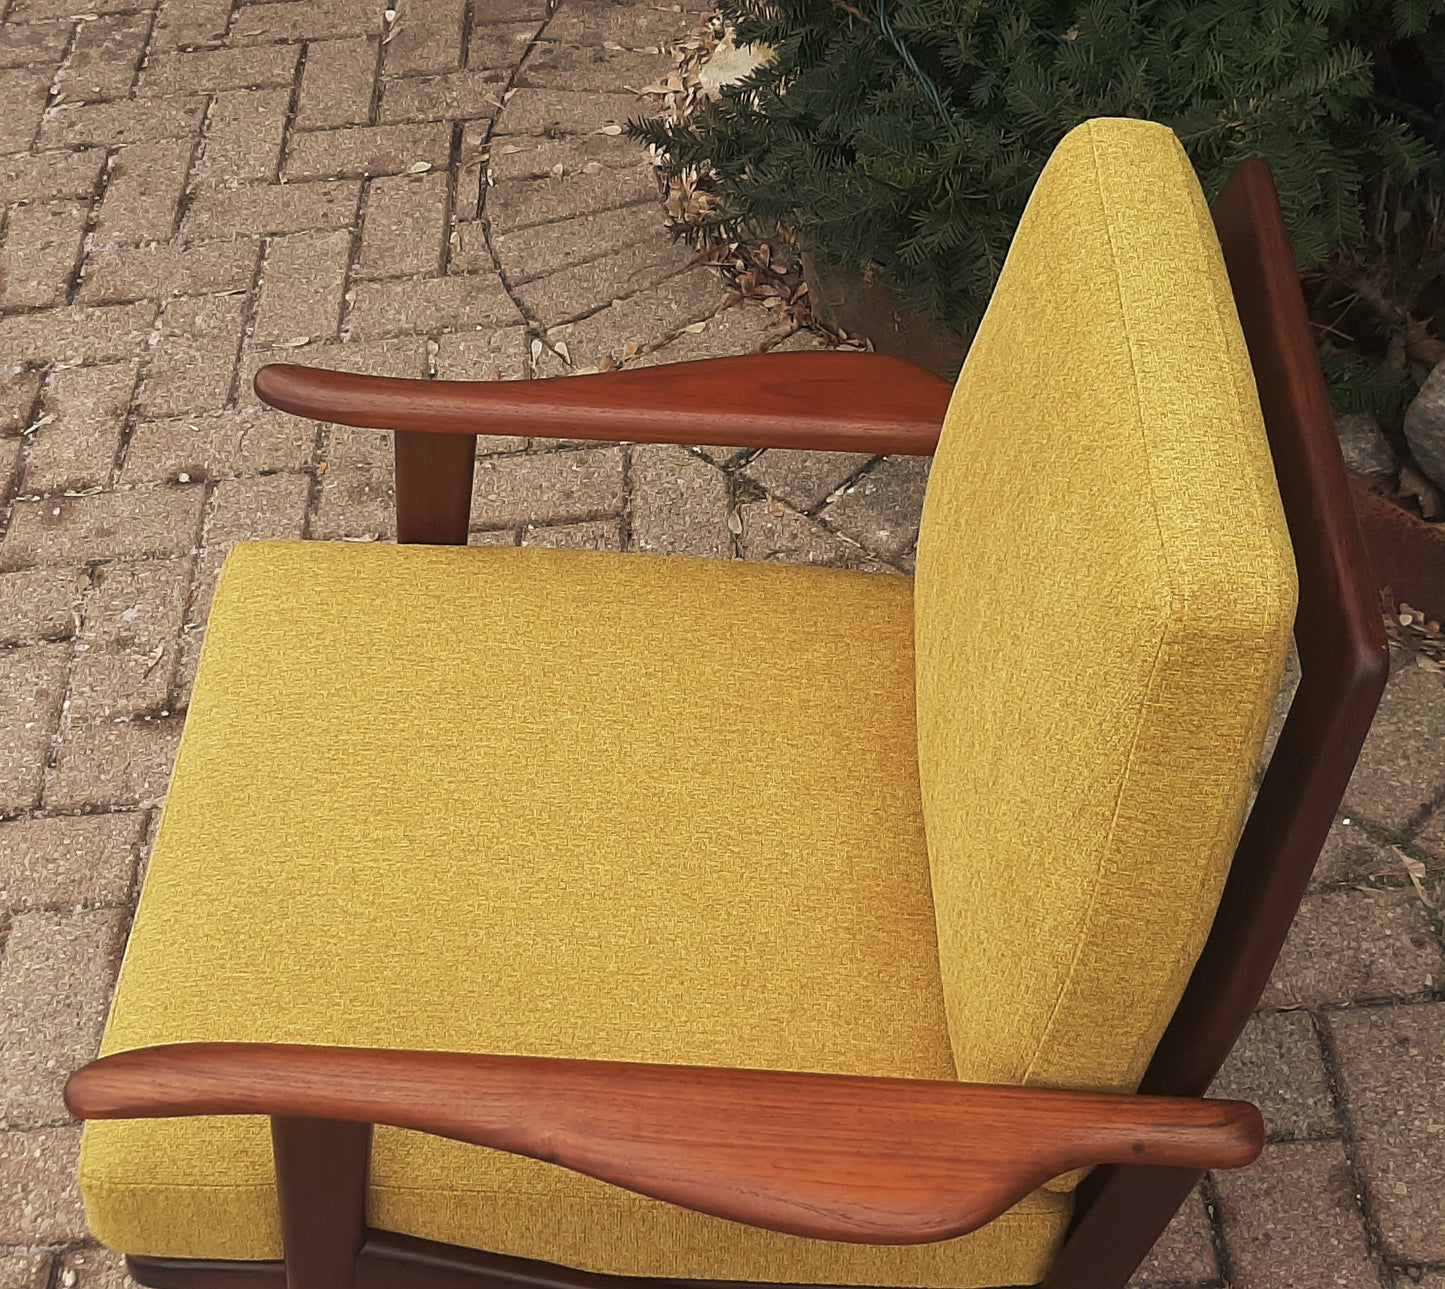 REFINISHED REUPHOLSTERED Danish Mid-Century Modern Teak Lounge Chair by Komfort, Perfect